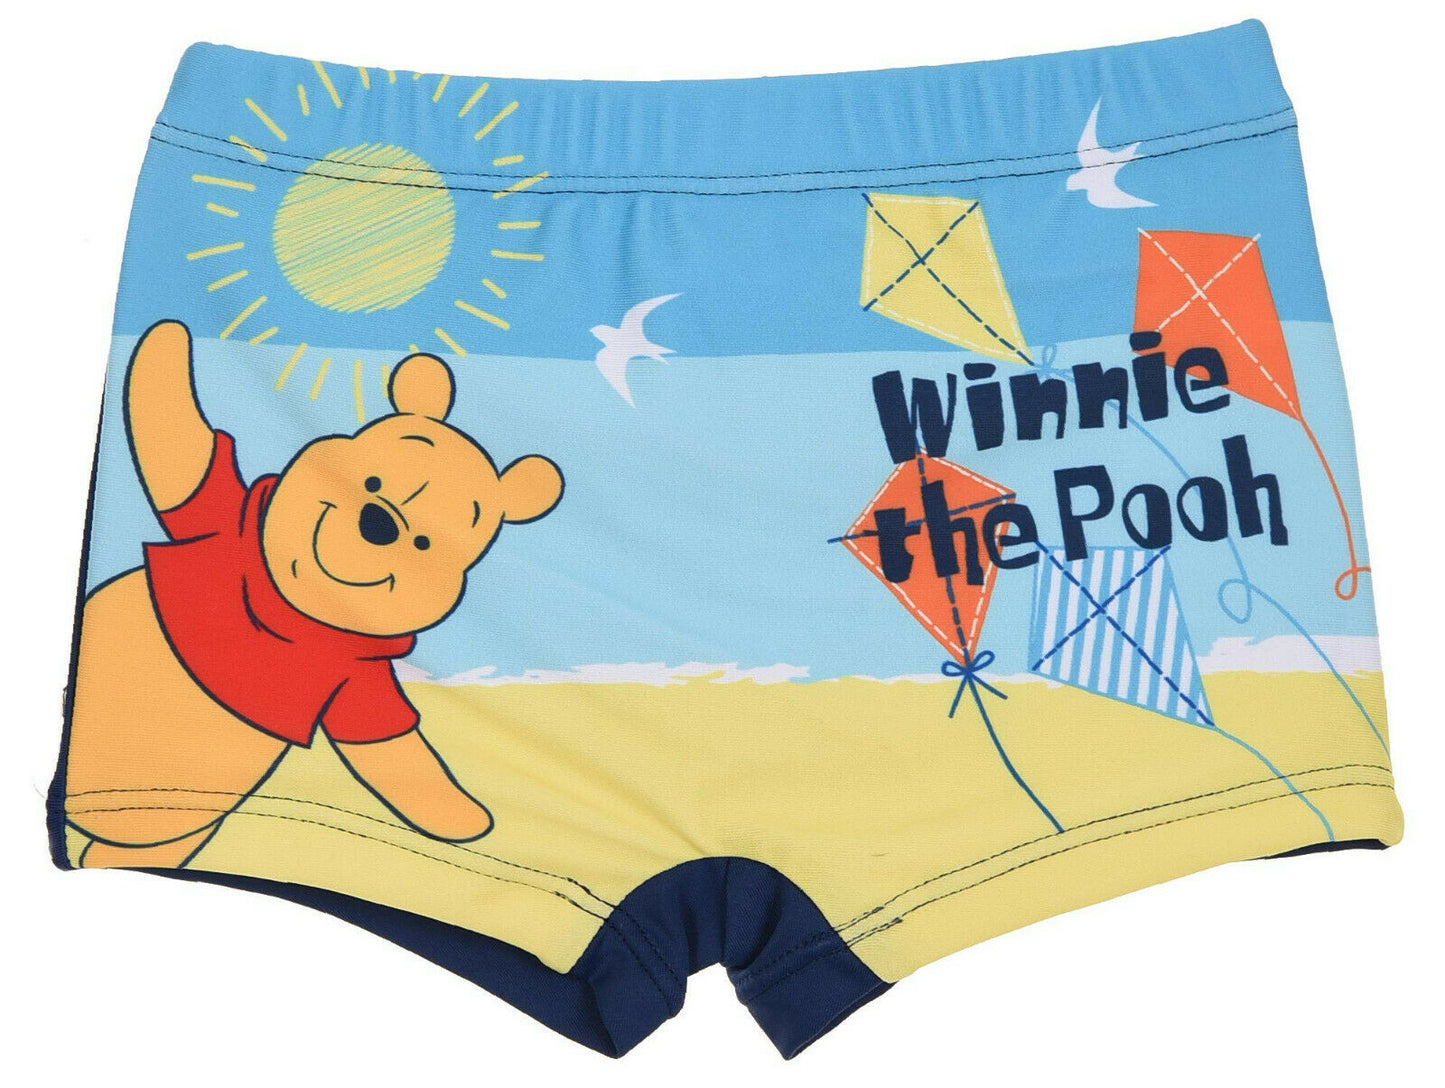 Boys Winnie The Pooh Navy Swimming Trunks. Available In Sizes 12 Months, 18 Months, 24 Months, 36 Months. These Are An Official Disney Product.